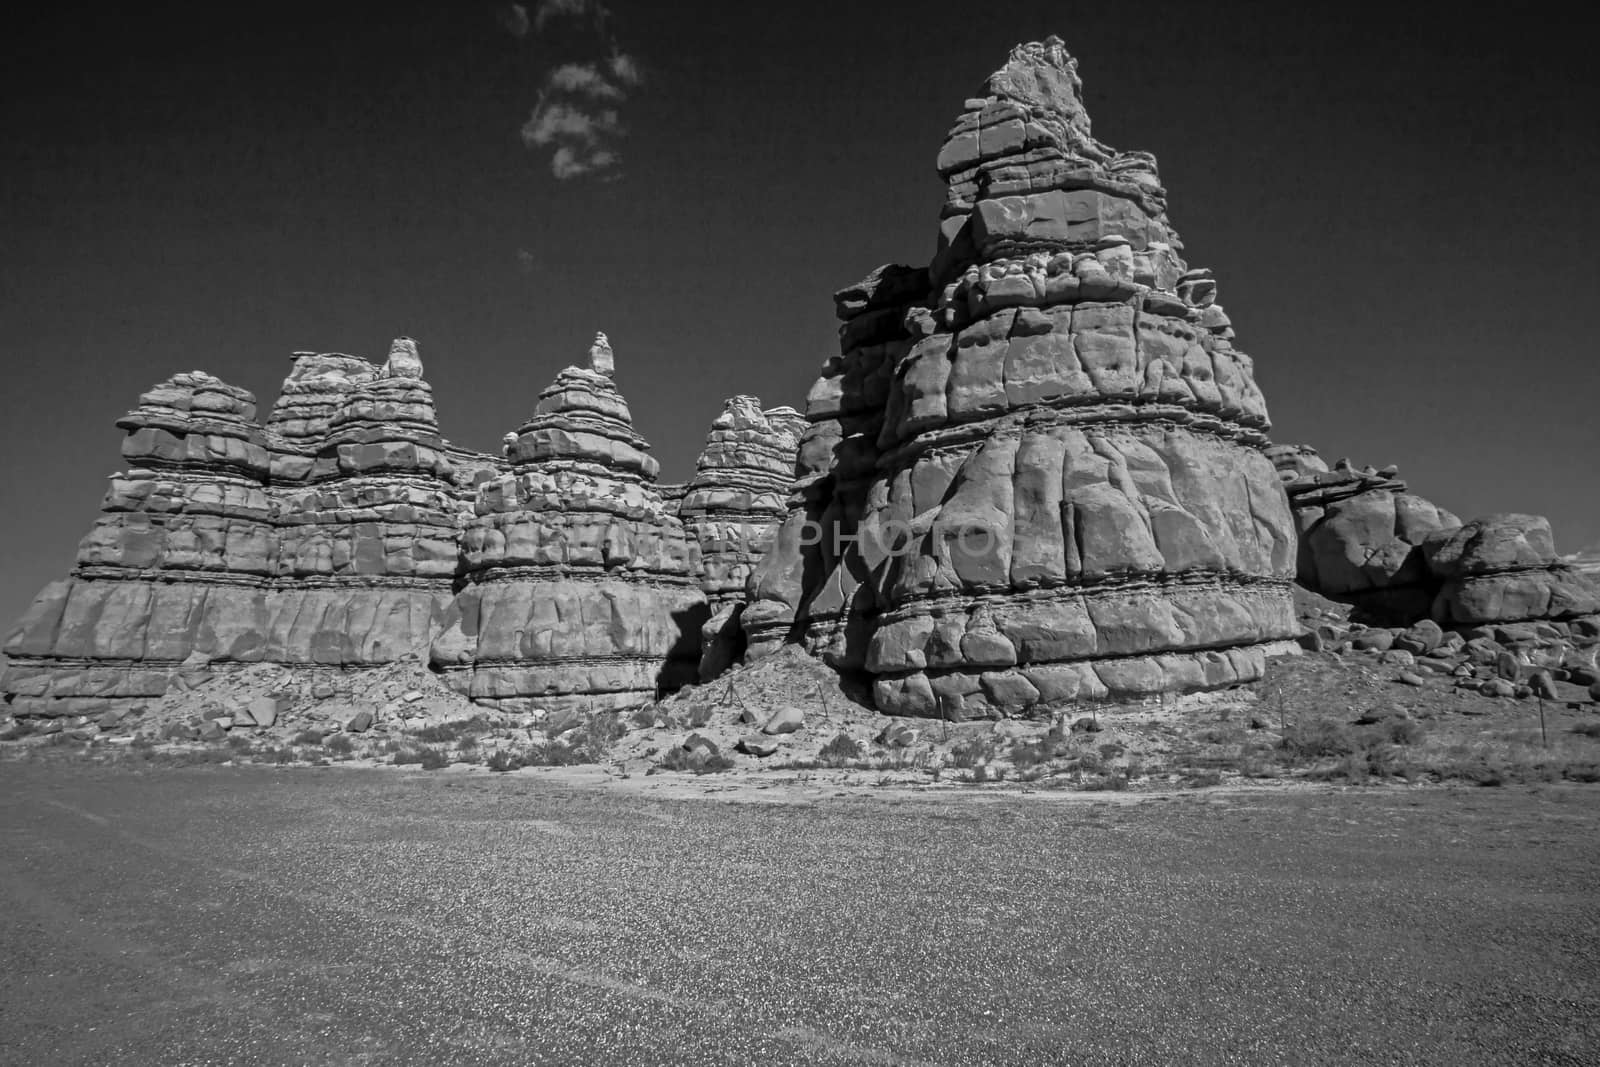 Strange Rock formations on Route 24, Wayne County. UT by kobus_peche